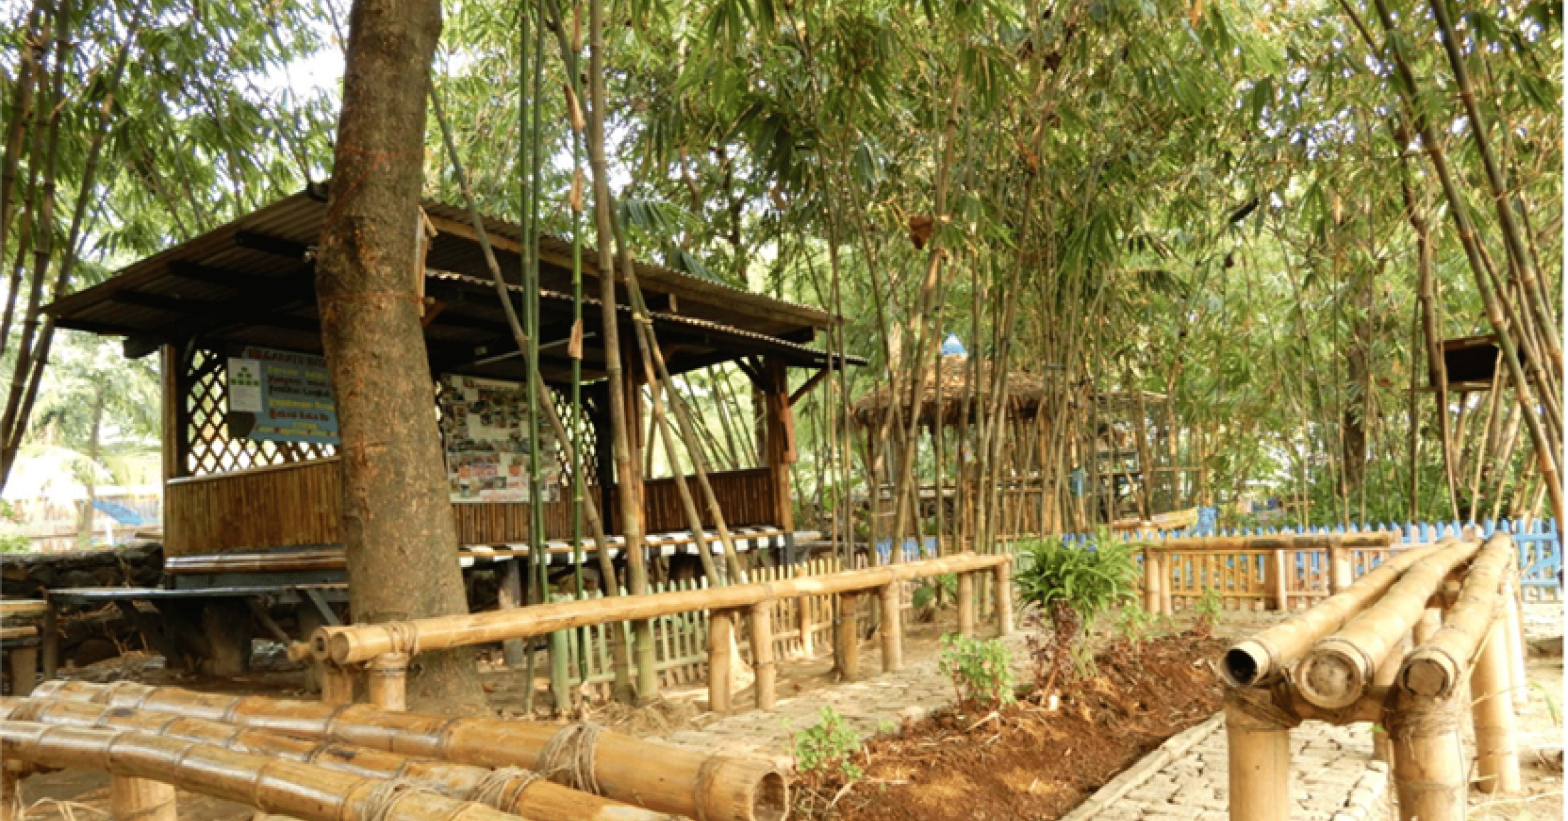 Strategy to optimize bamboo woven crafts based on smart village methods to encourage rural economy in Indonesia